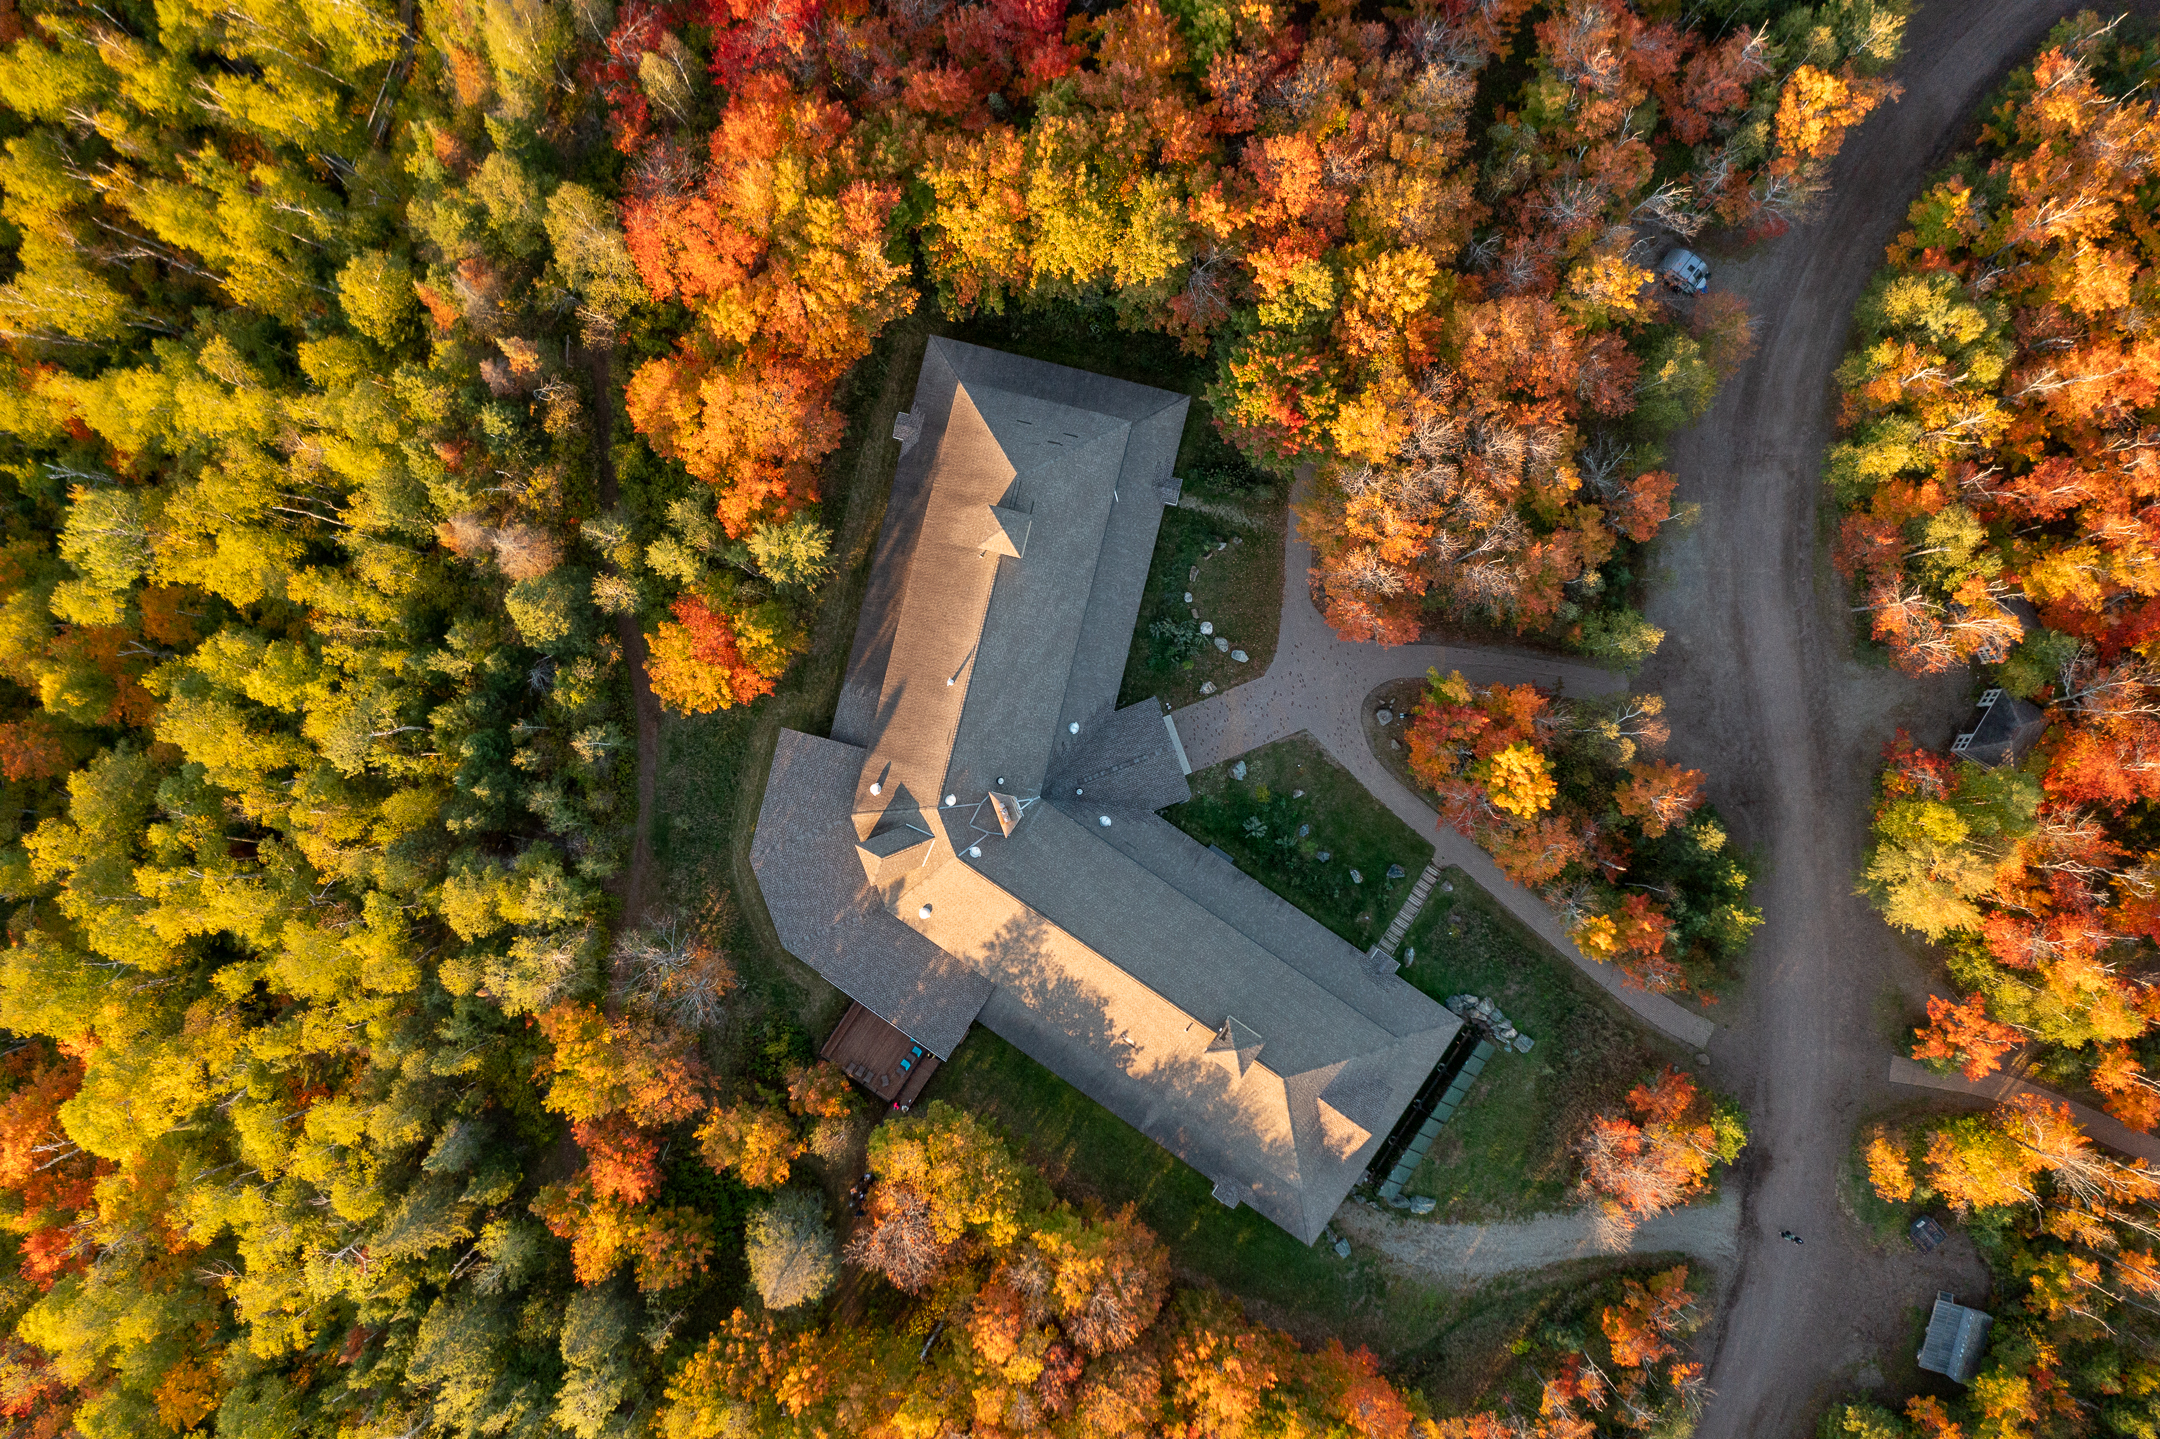 Drone View of Building in Forest With Red and Yellow Leaves